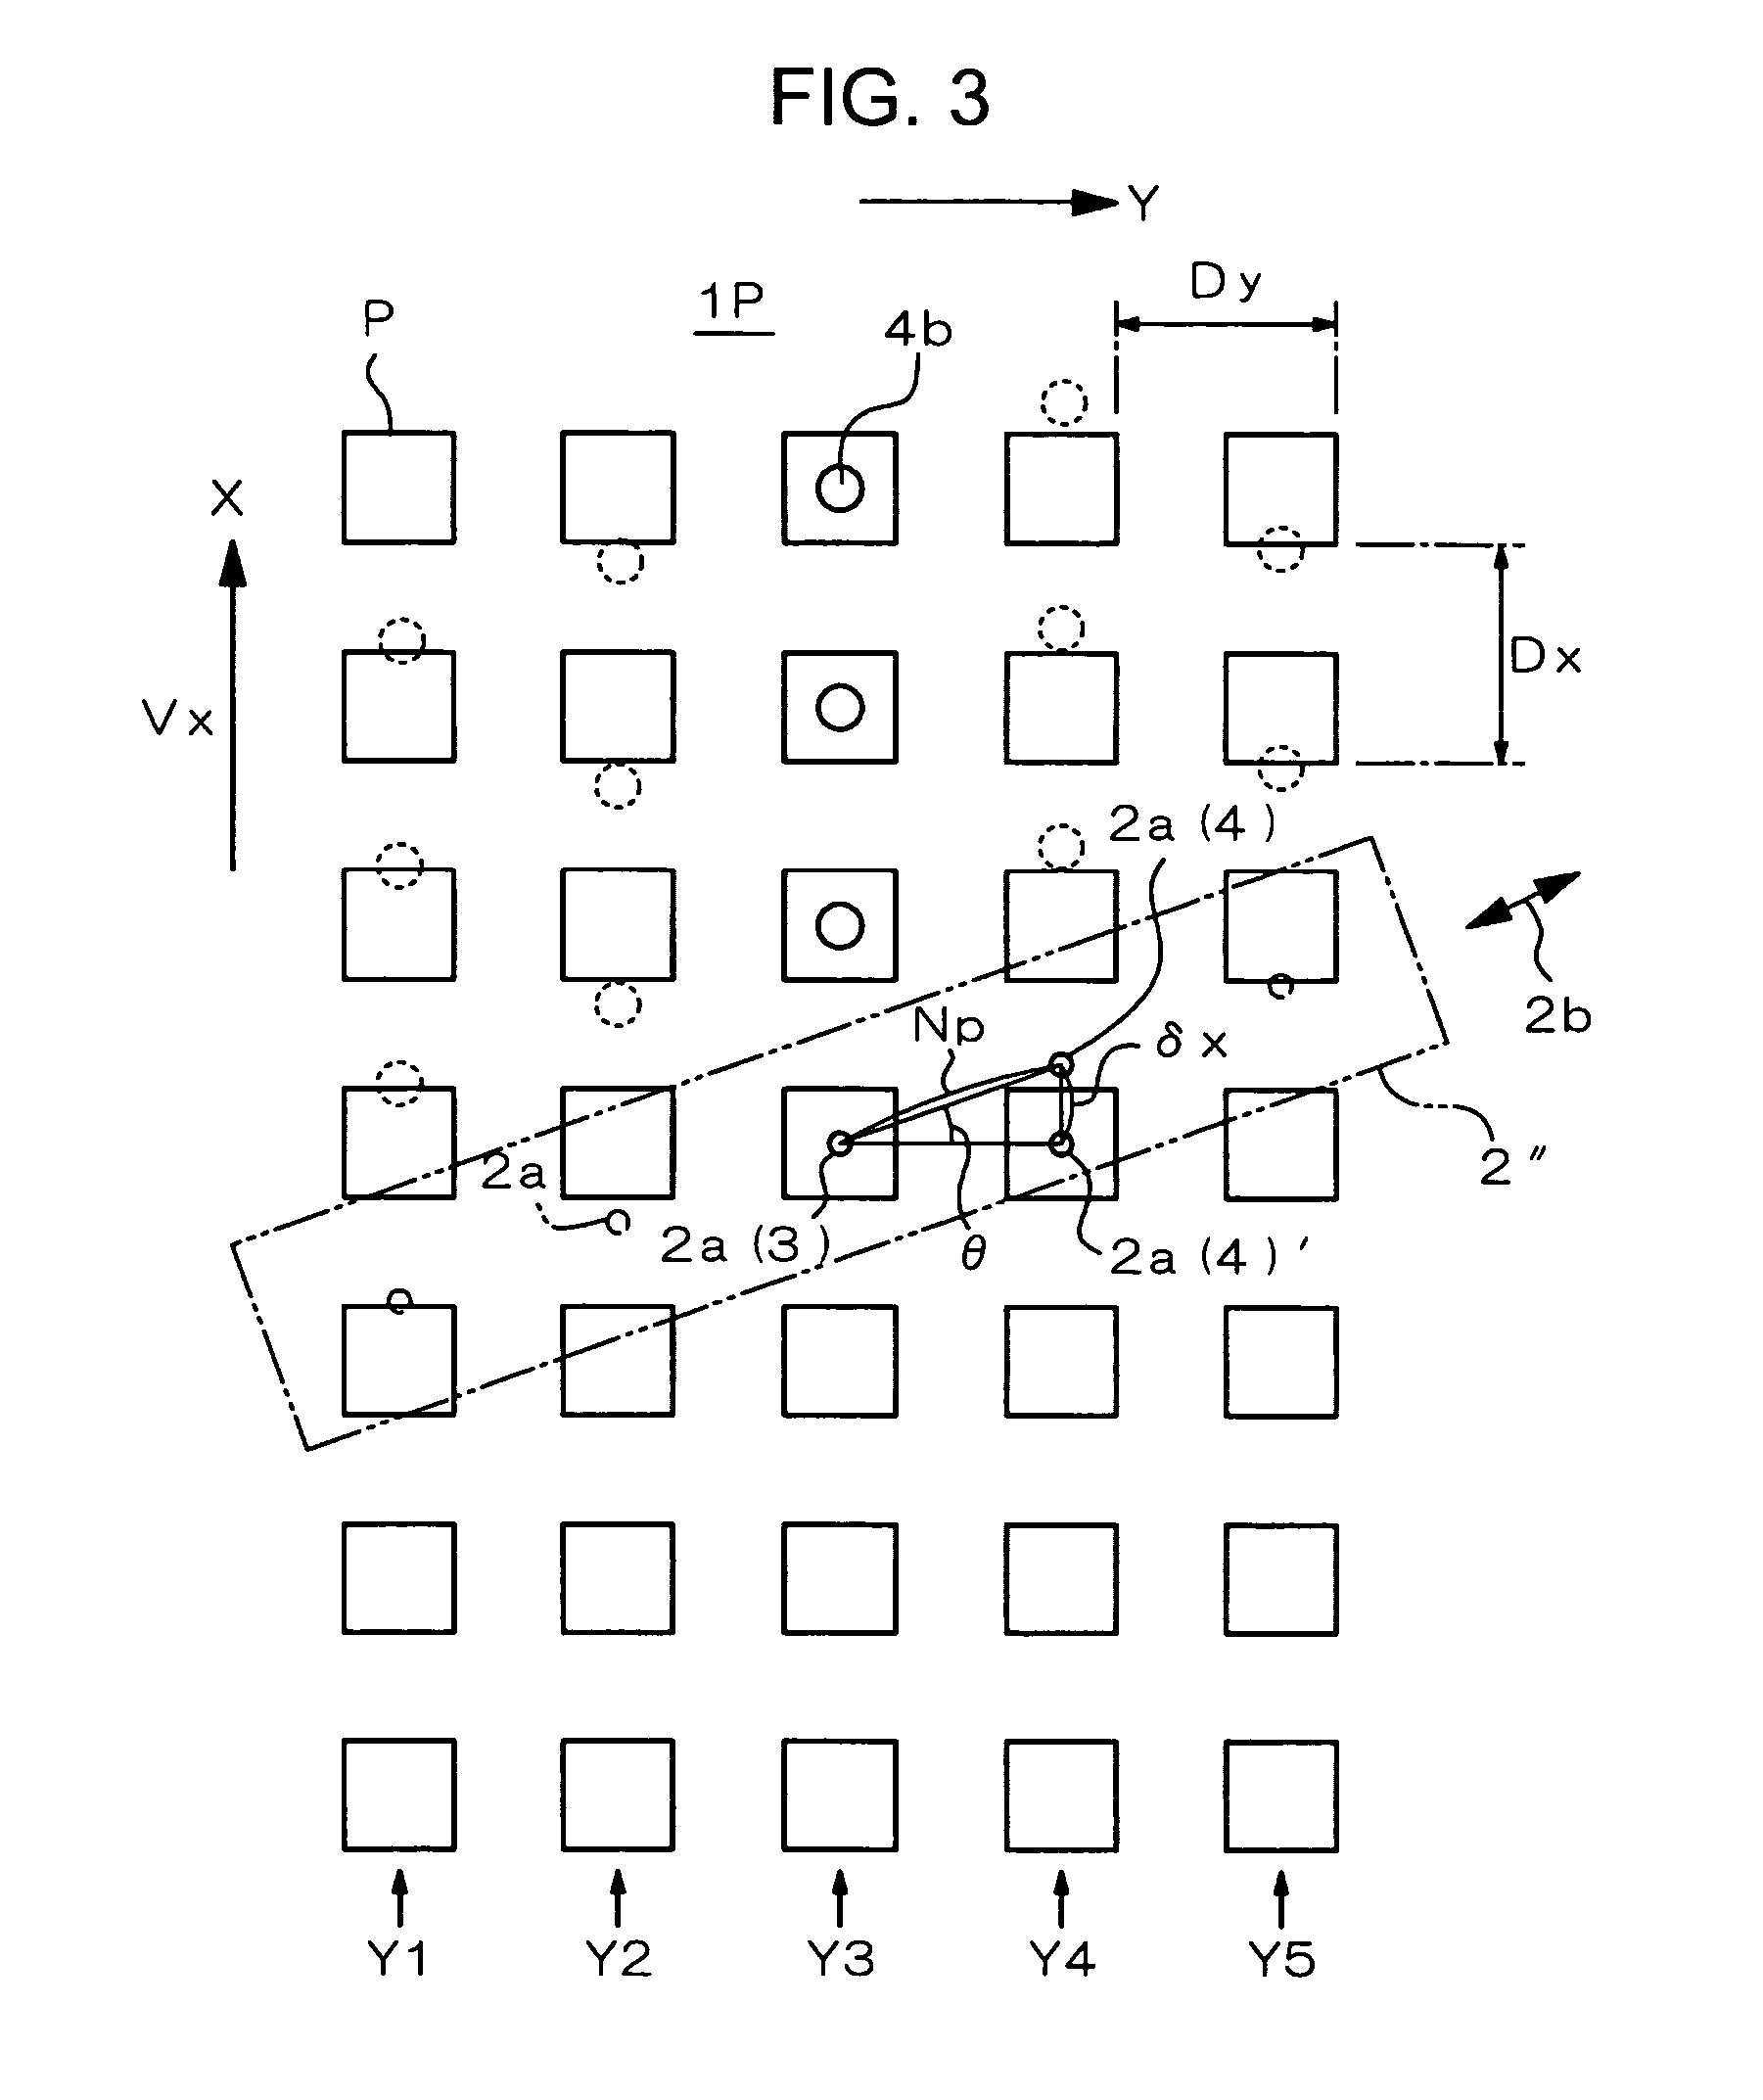 Film forming method for manufacturing planar periodic structure having predetermined periodicity